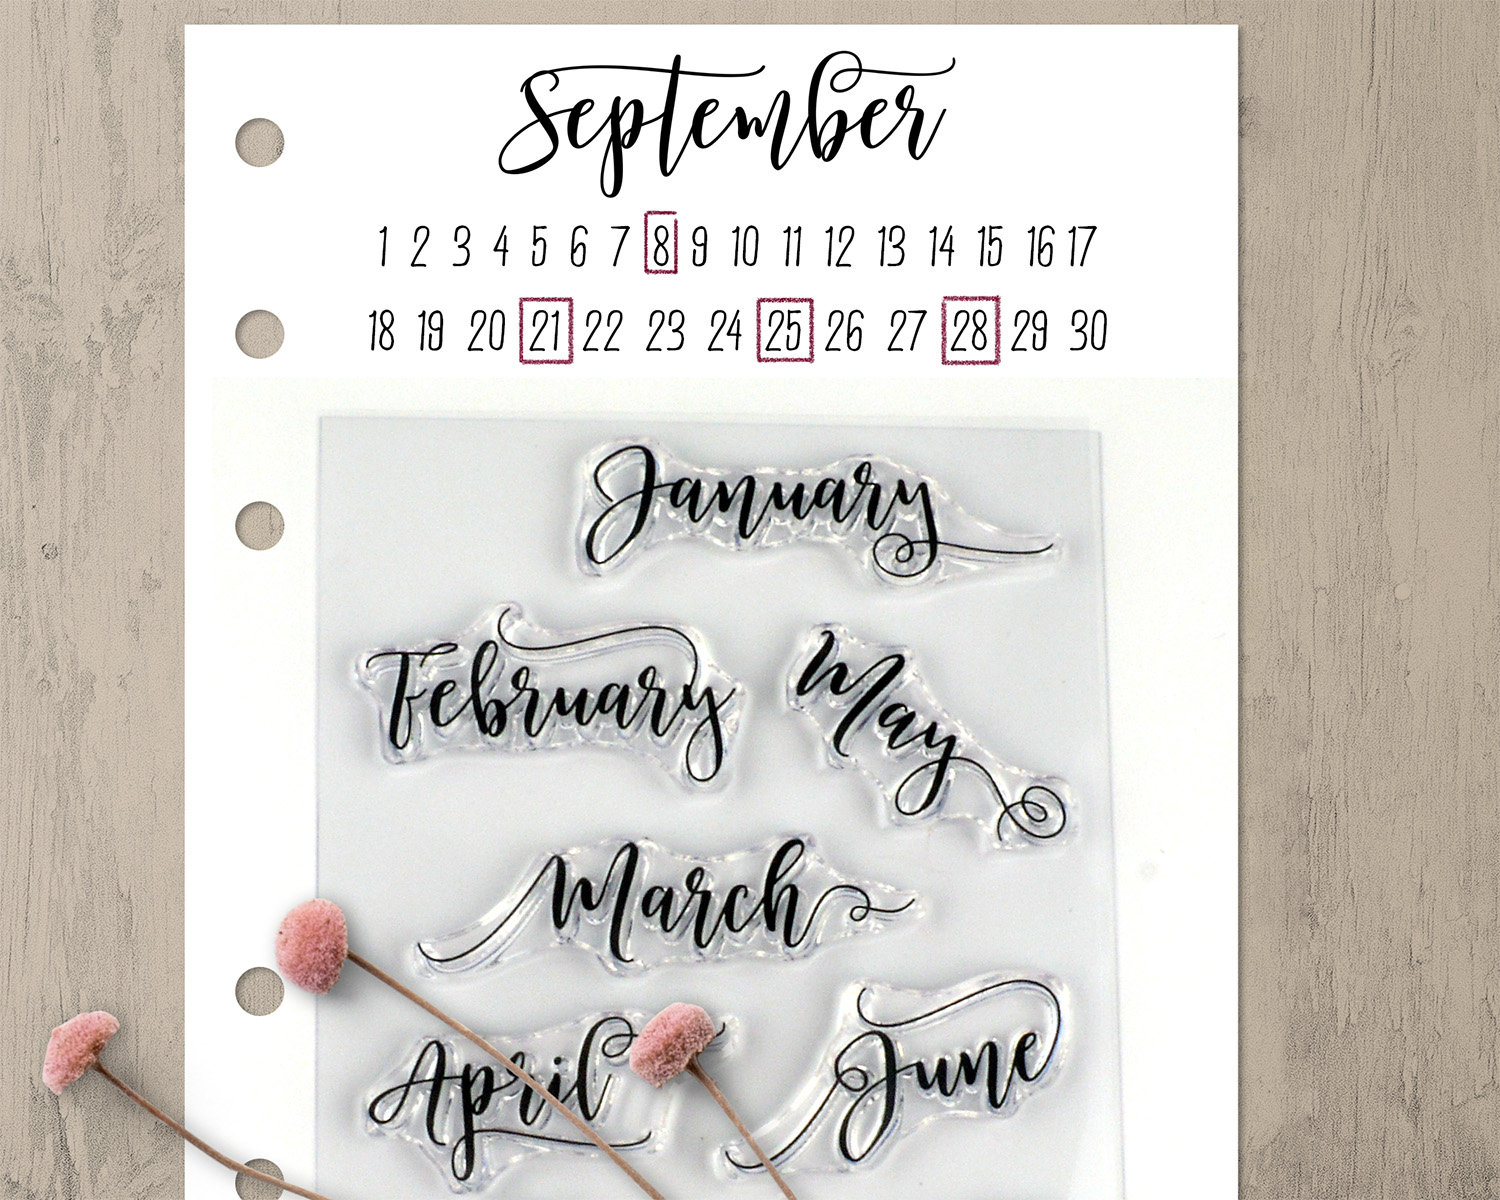 Month Bullet Journal Stamps, Clear Planner Stamps, Months of the Year  Calendar - Printed Heron